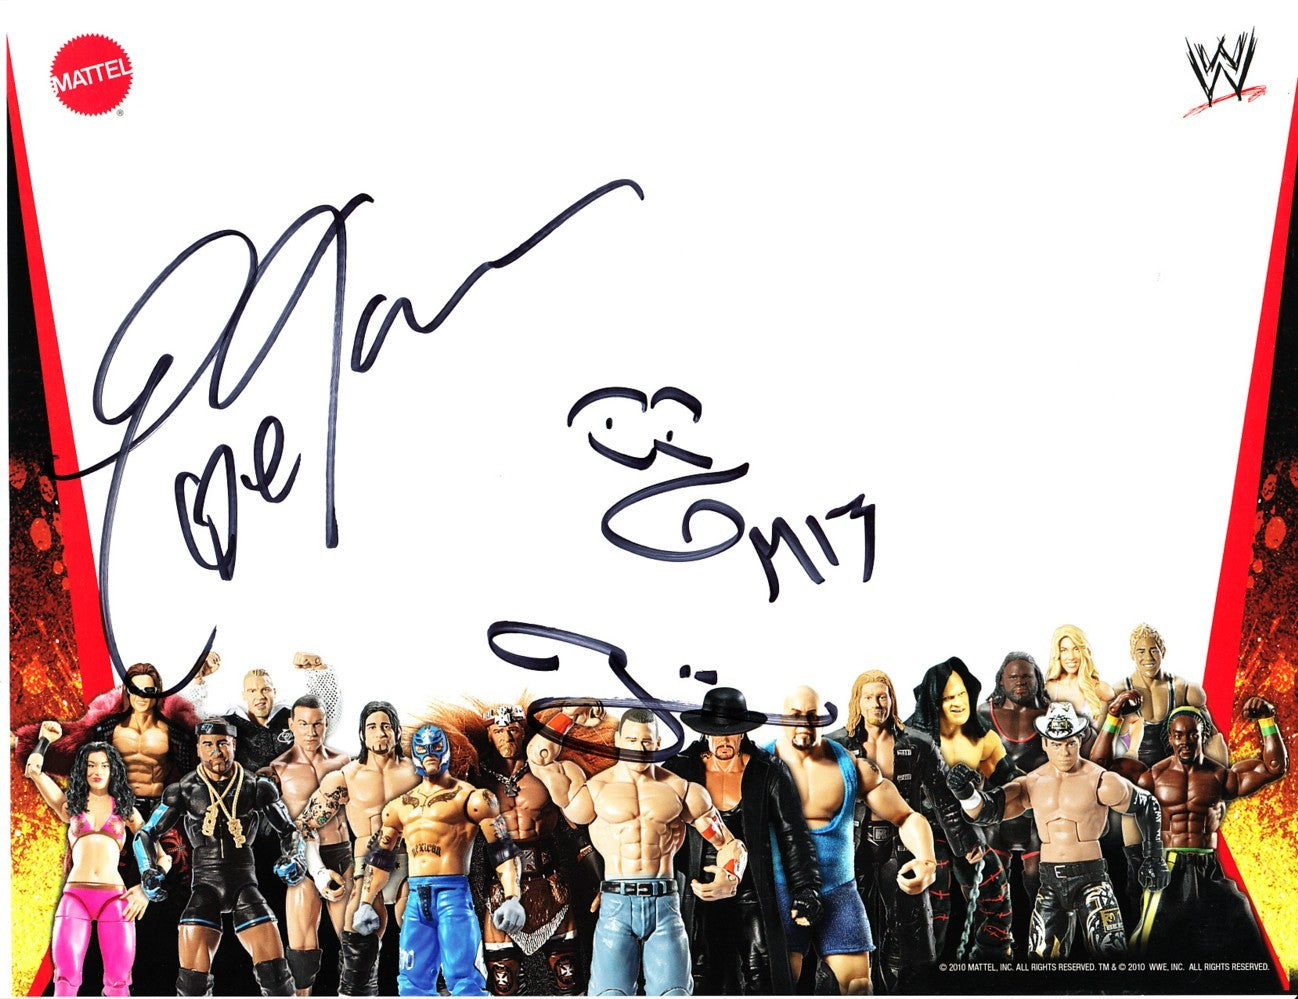 Eve Torres and The Miz autographed WWE wrestling Mattel 2010 Comic-Con promo photo